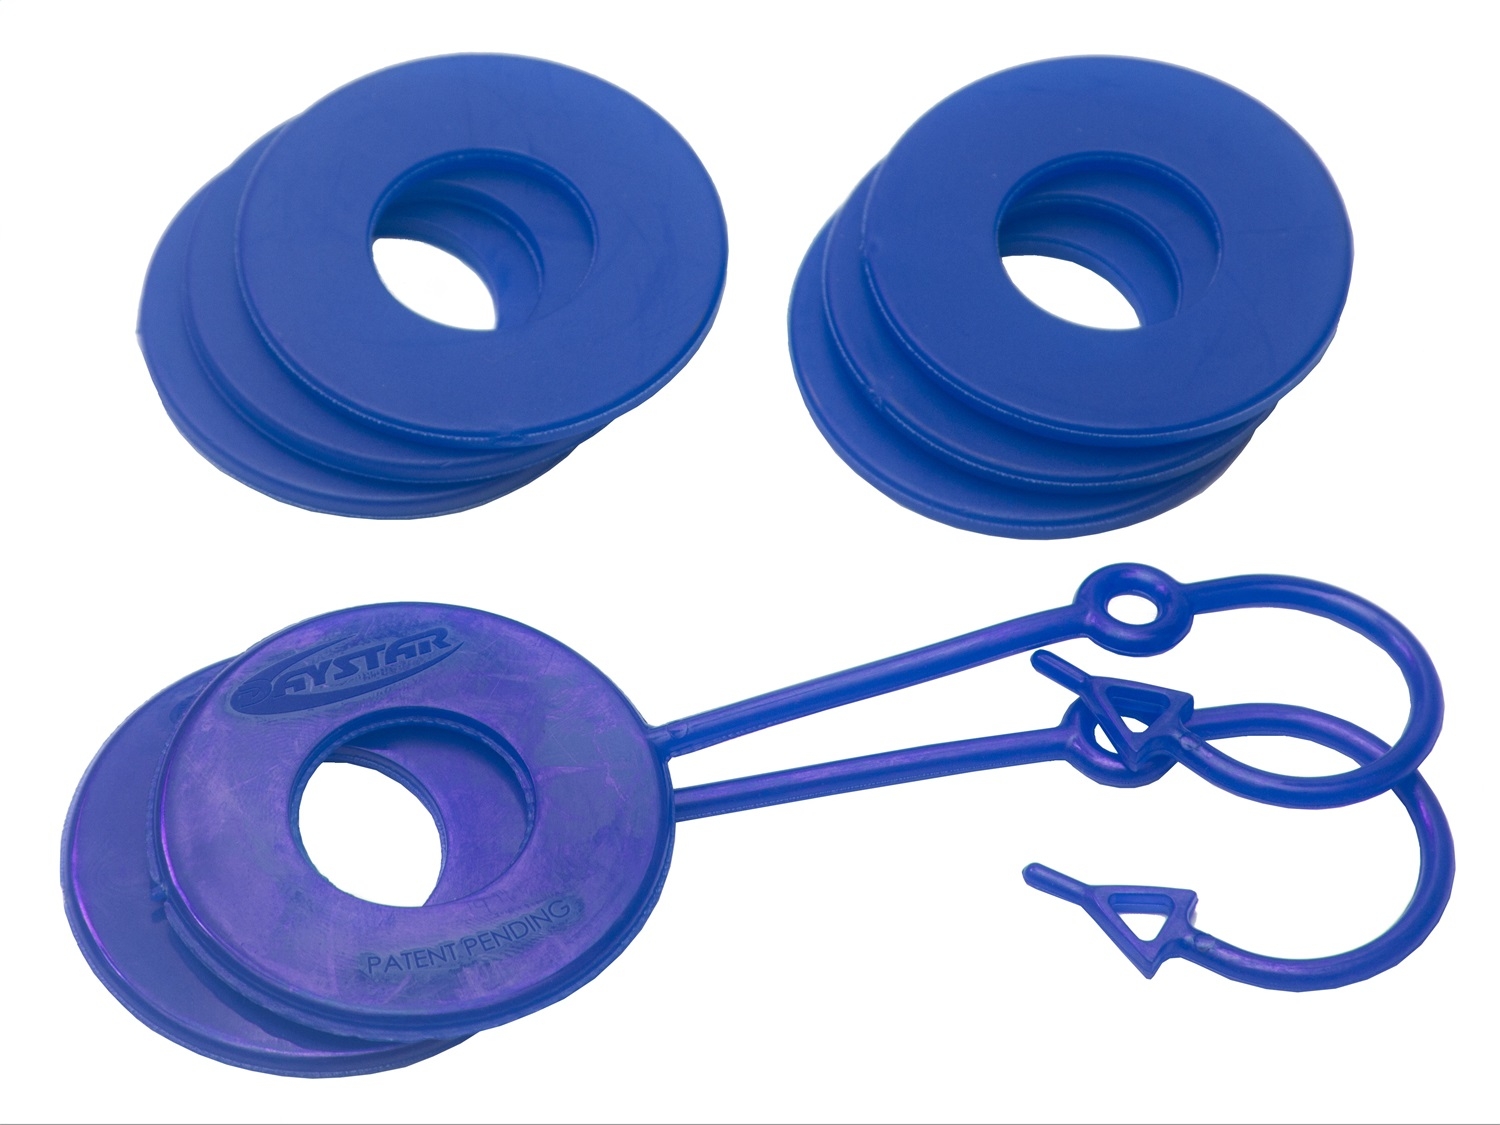 Daystar D Ring Isolator With Lock Washer Kit 6 Washers 2 Locking Washers 2 Isolators Blue,